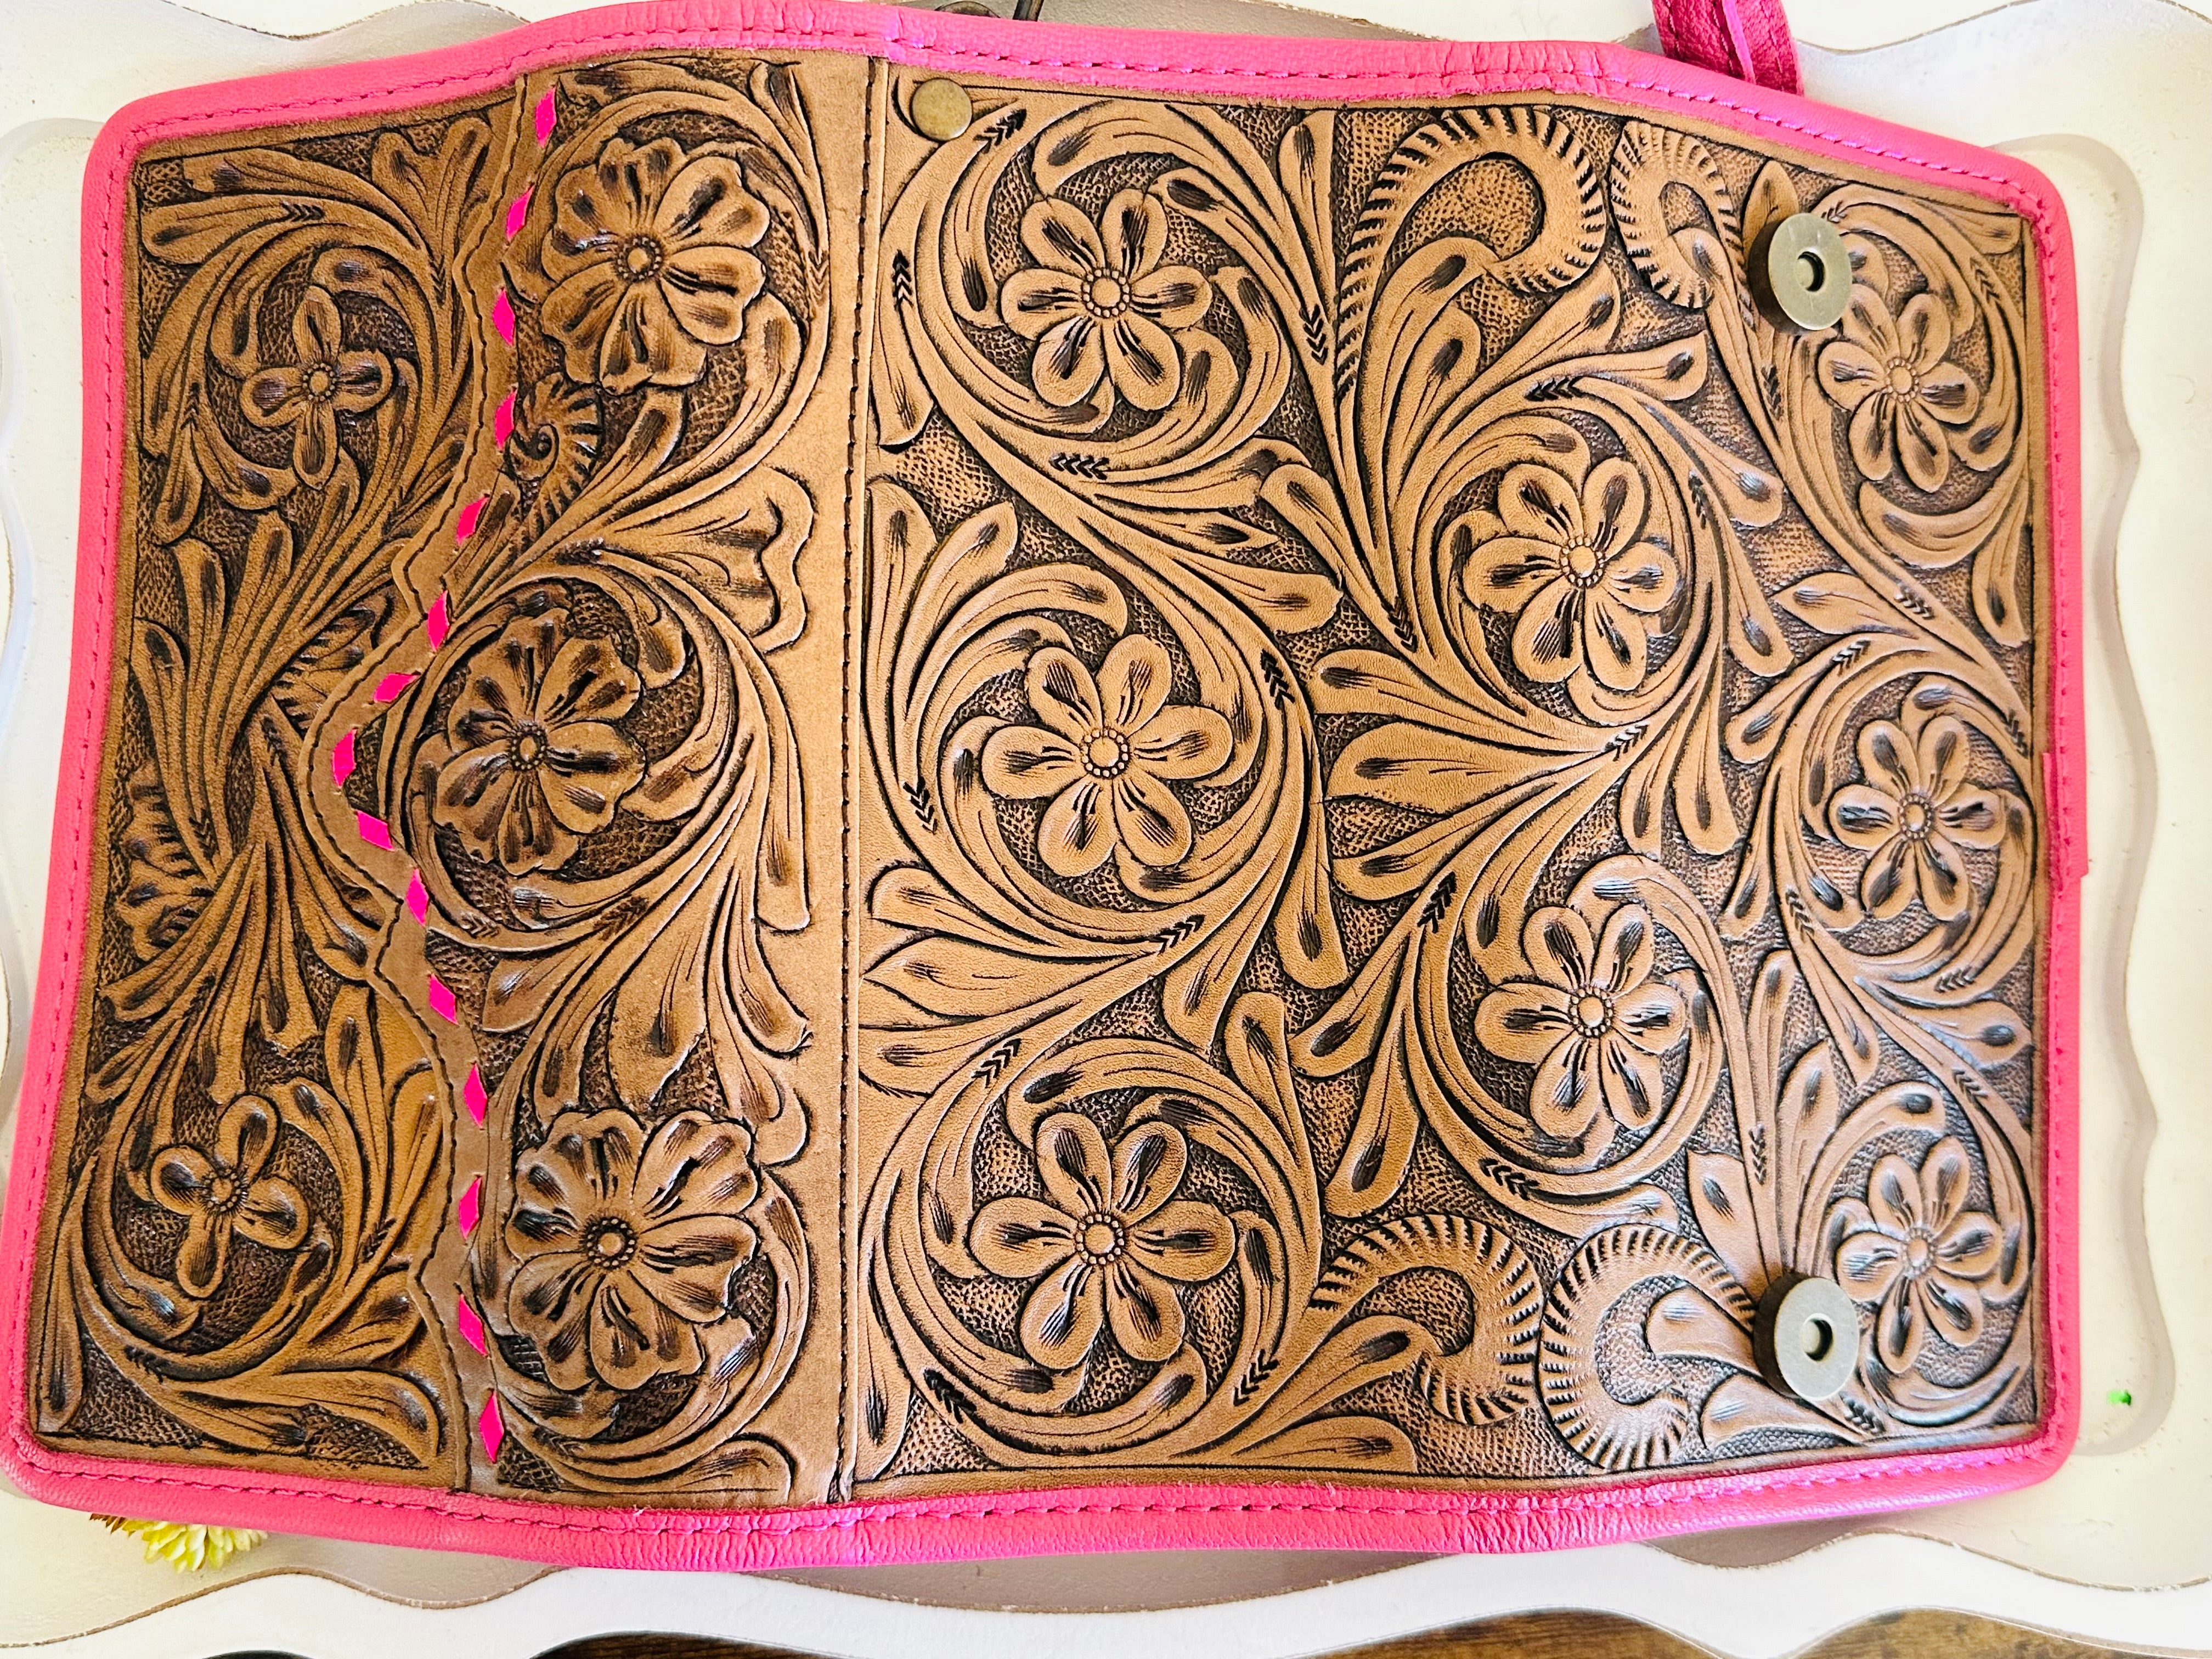 Genuine Tooled Leather Wallet/Clutch